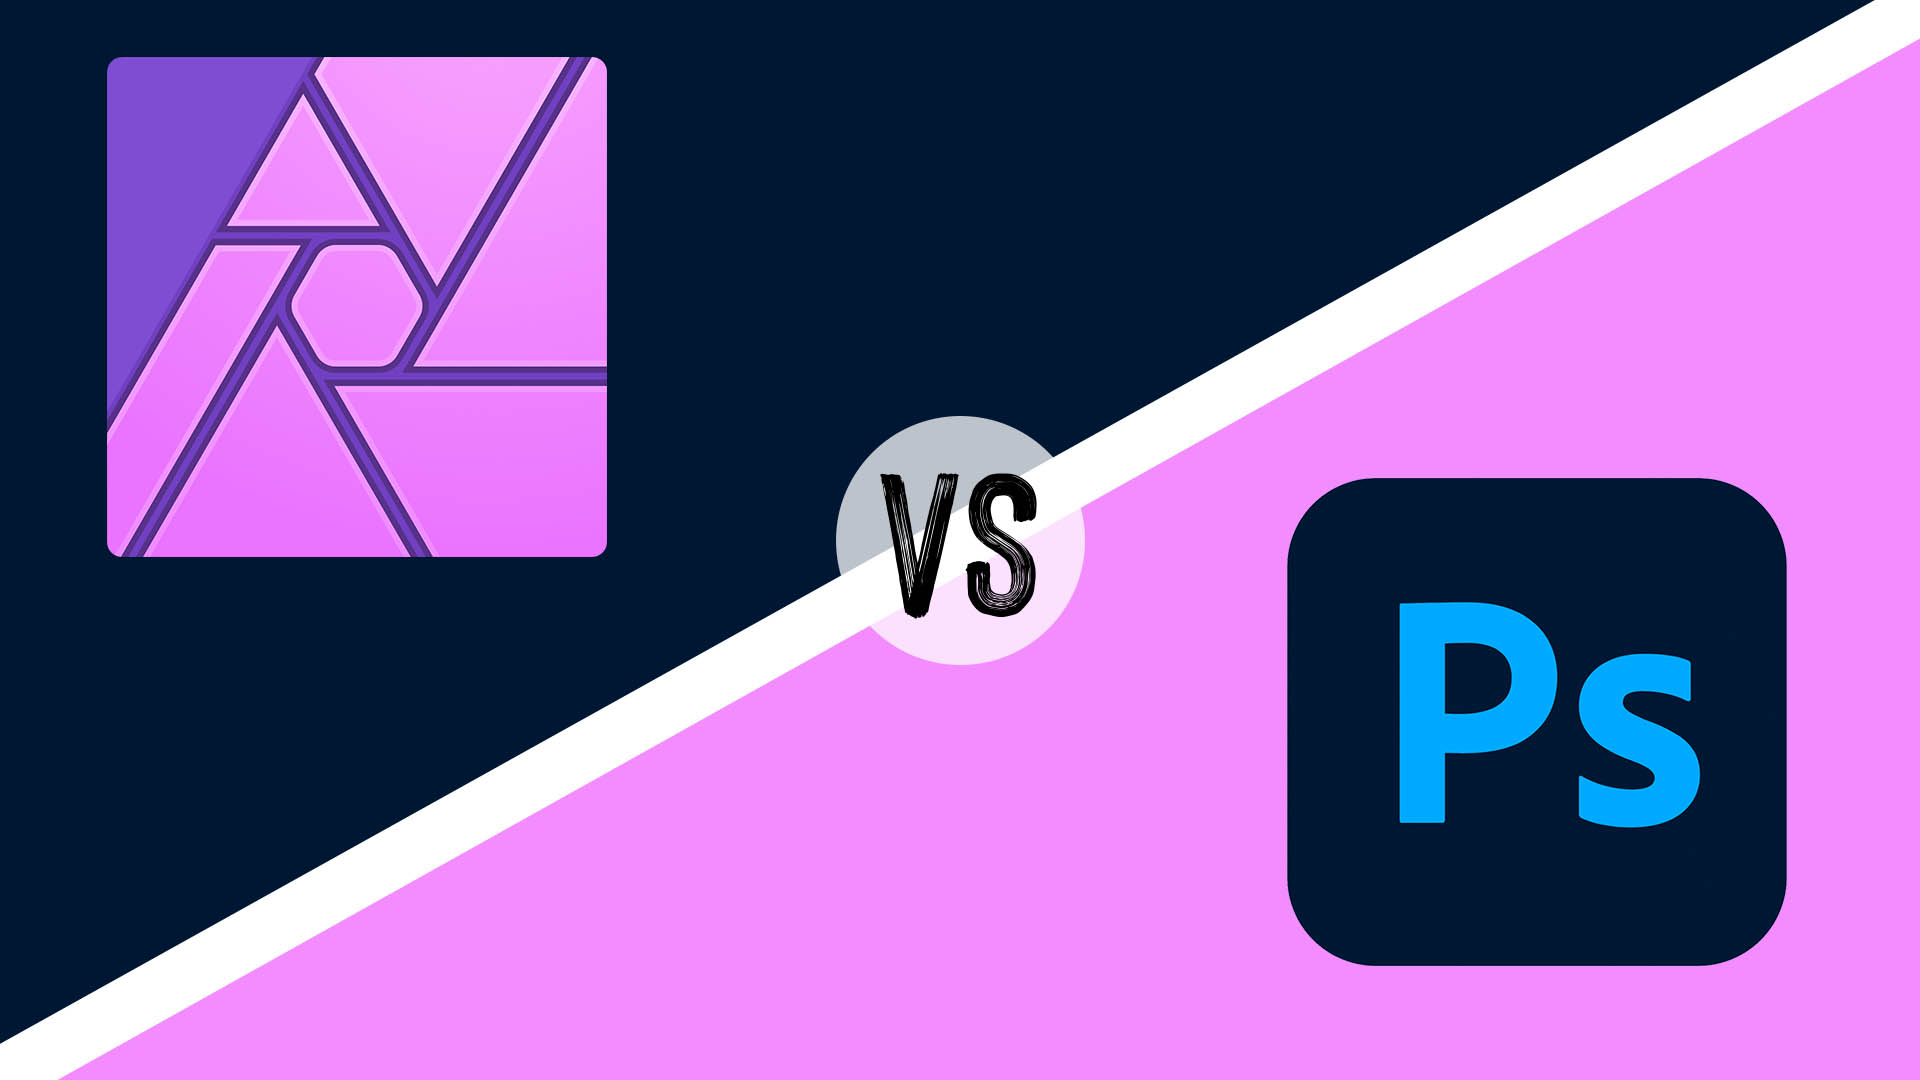 Affinity Photo vs Photoshop: which is right for you?